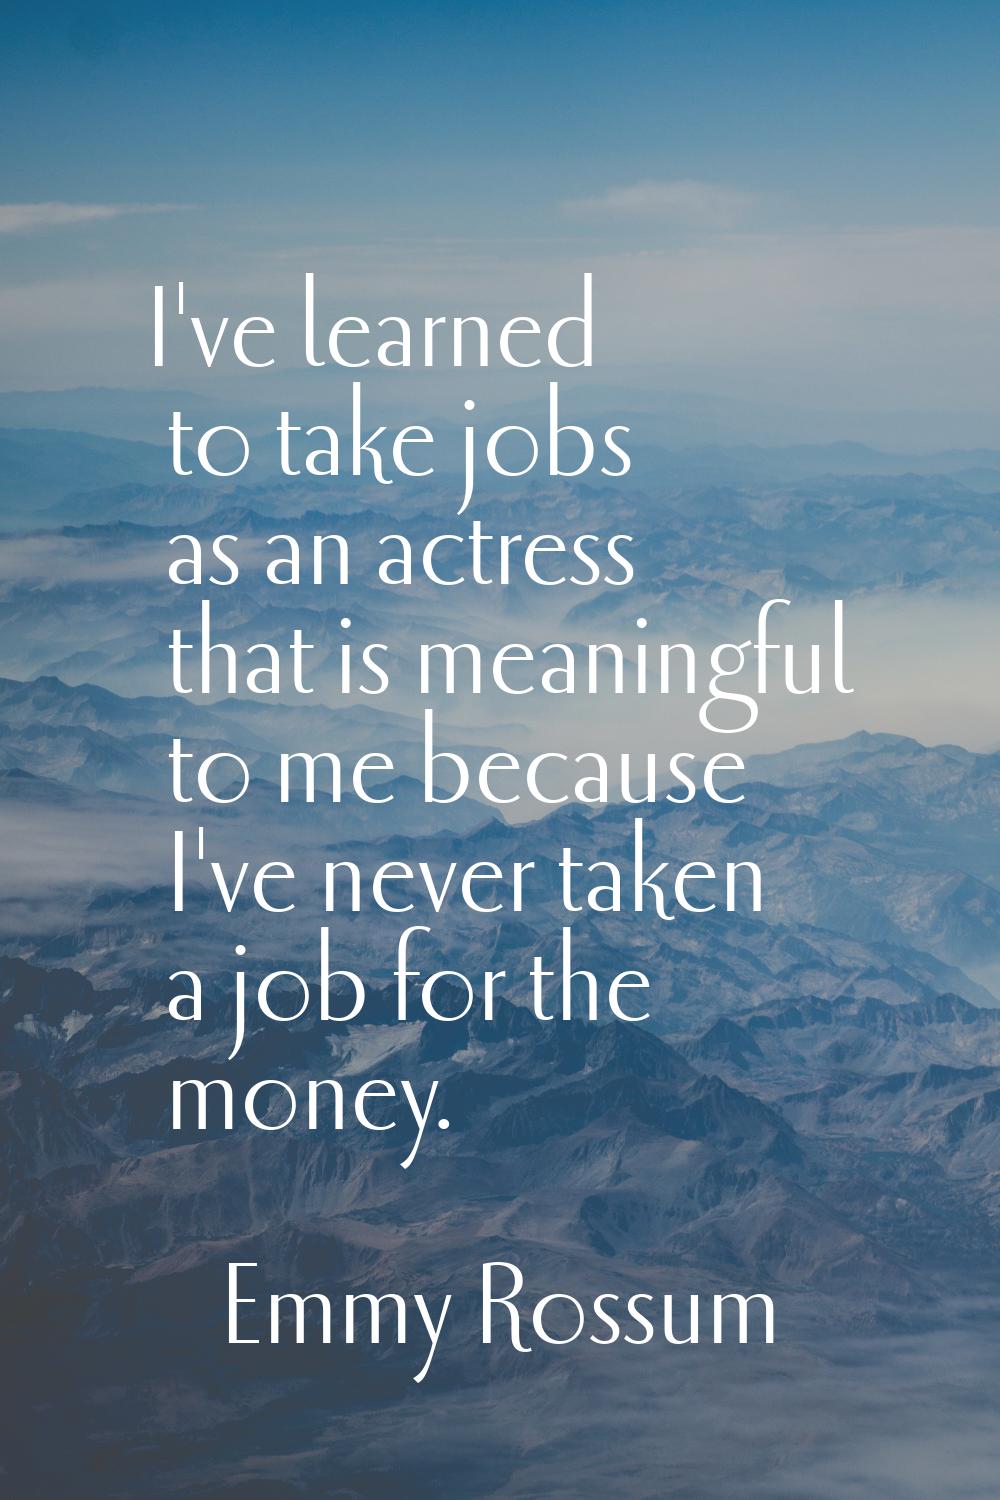 I've learned to take jobs as an actress that is meaningful to me because I've never taken a job for